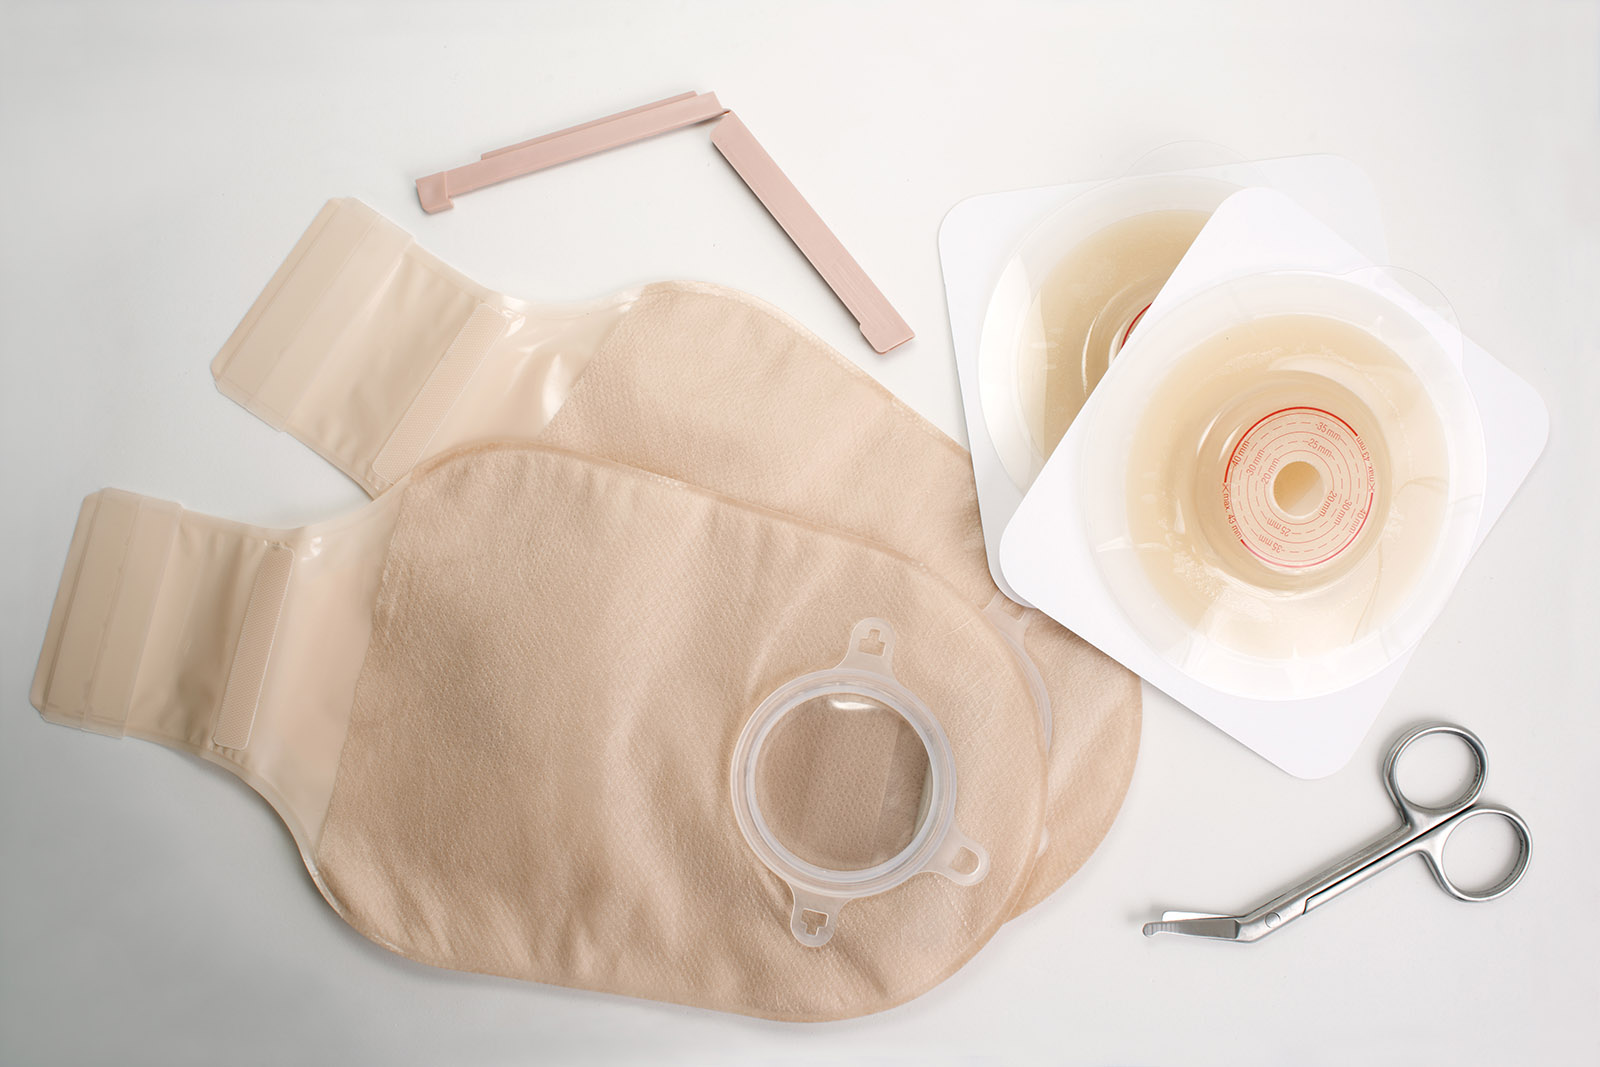 10 Ostomy Products For Your Travel Kit